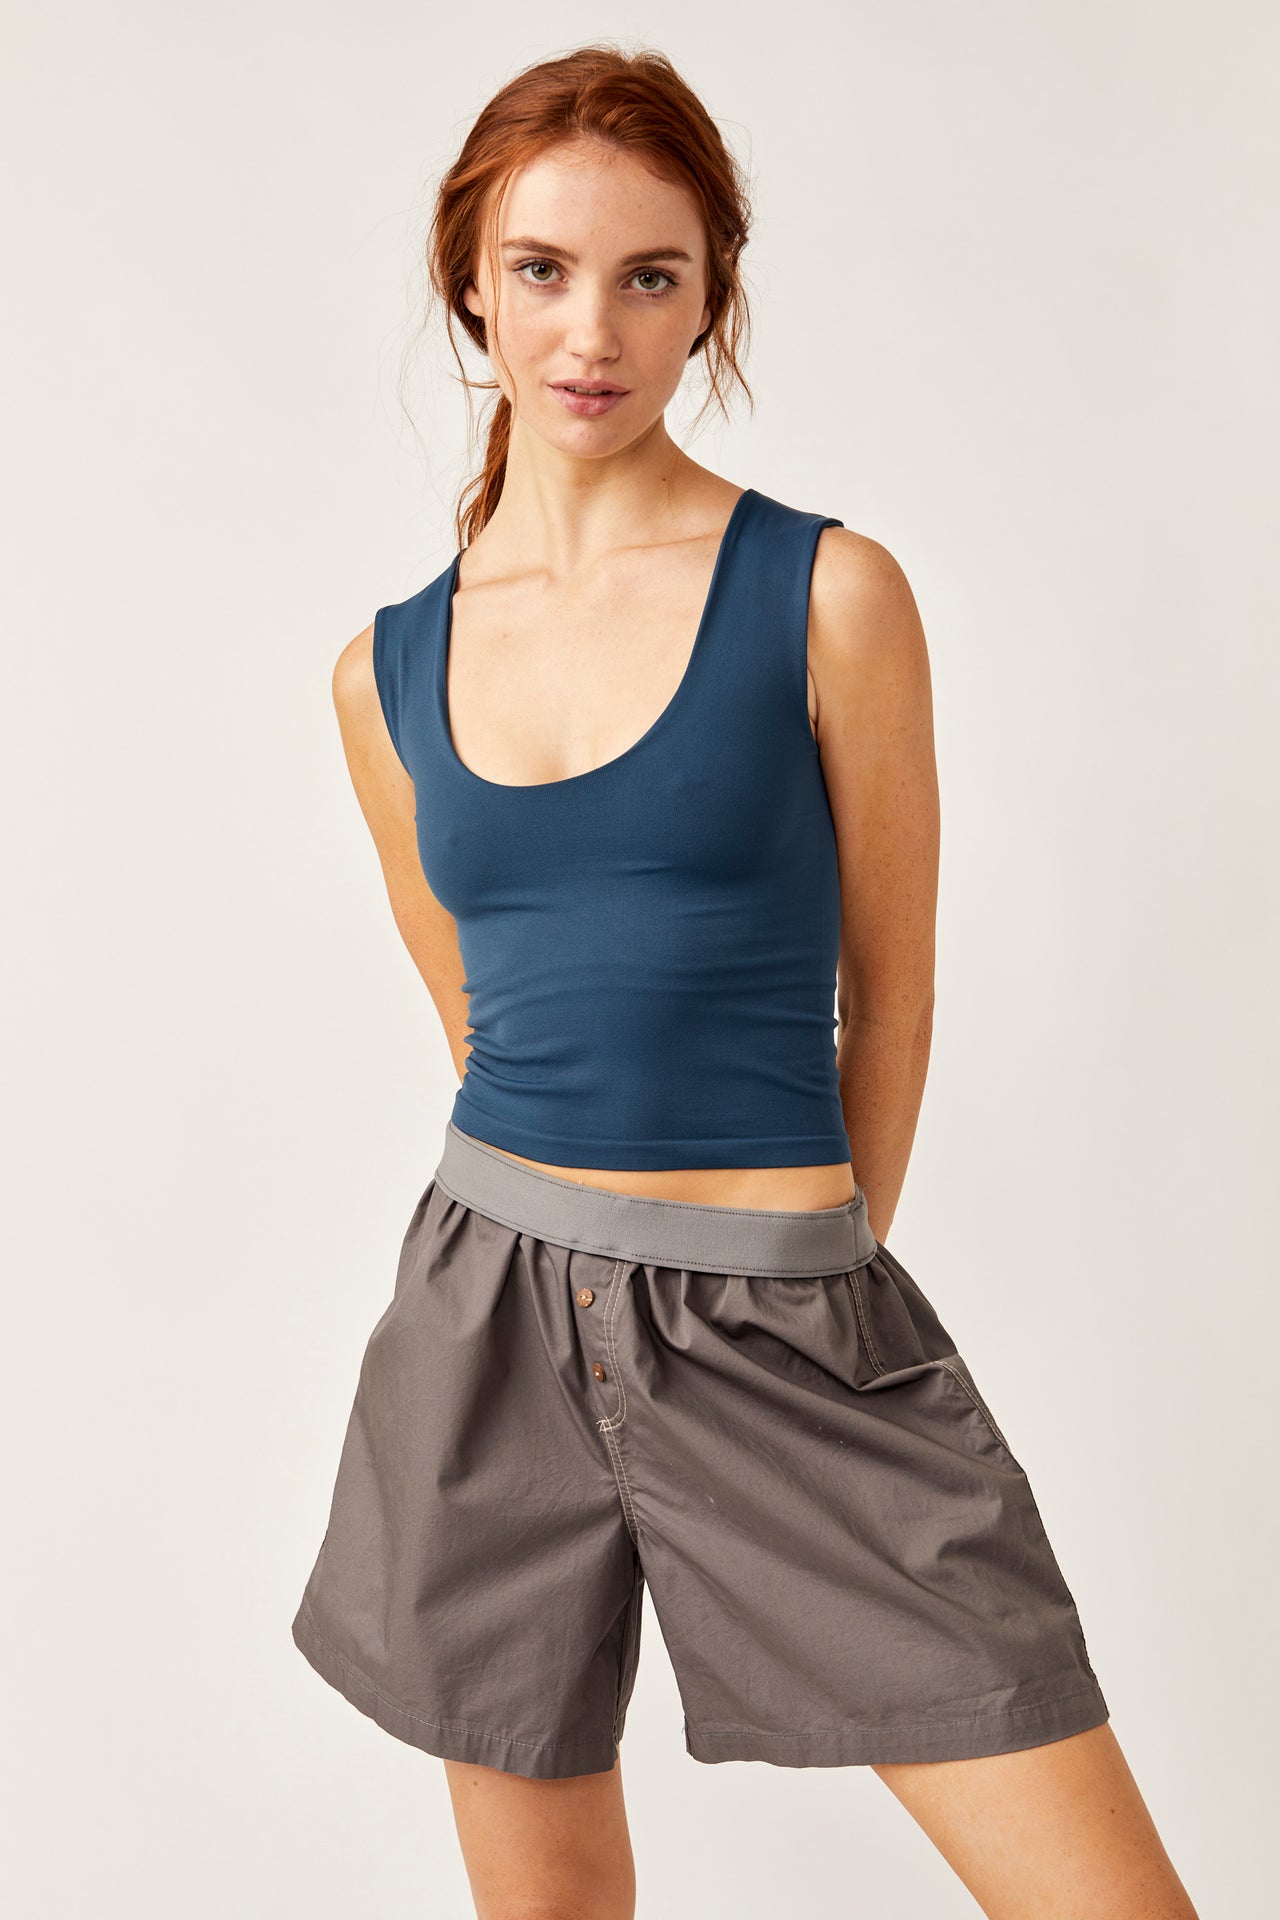 Clean Lines Muscle Cami Navy, Tank Tee by Free People | LIT Boutique